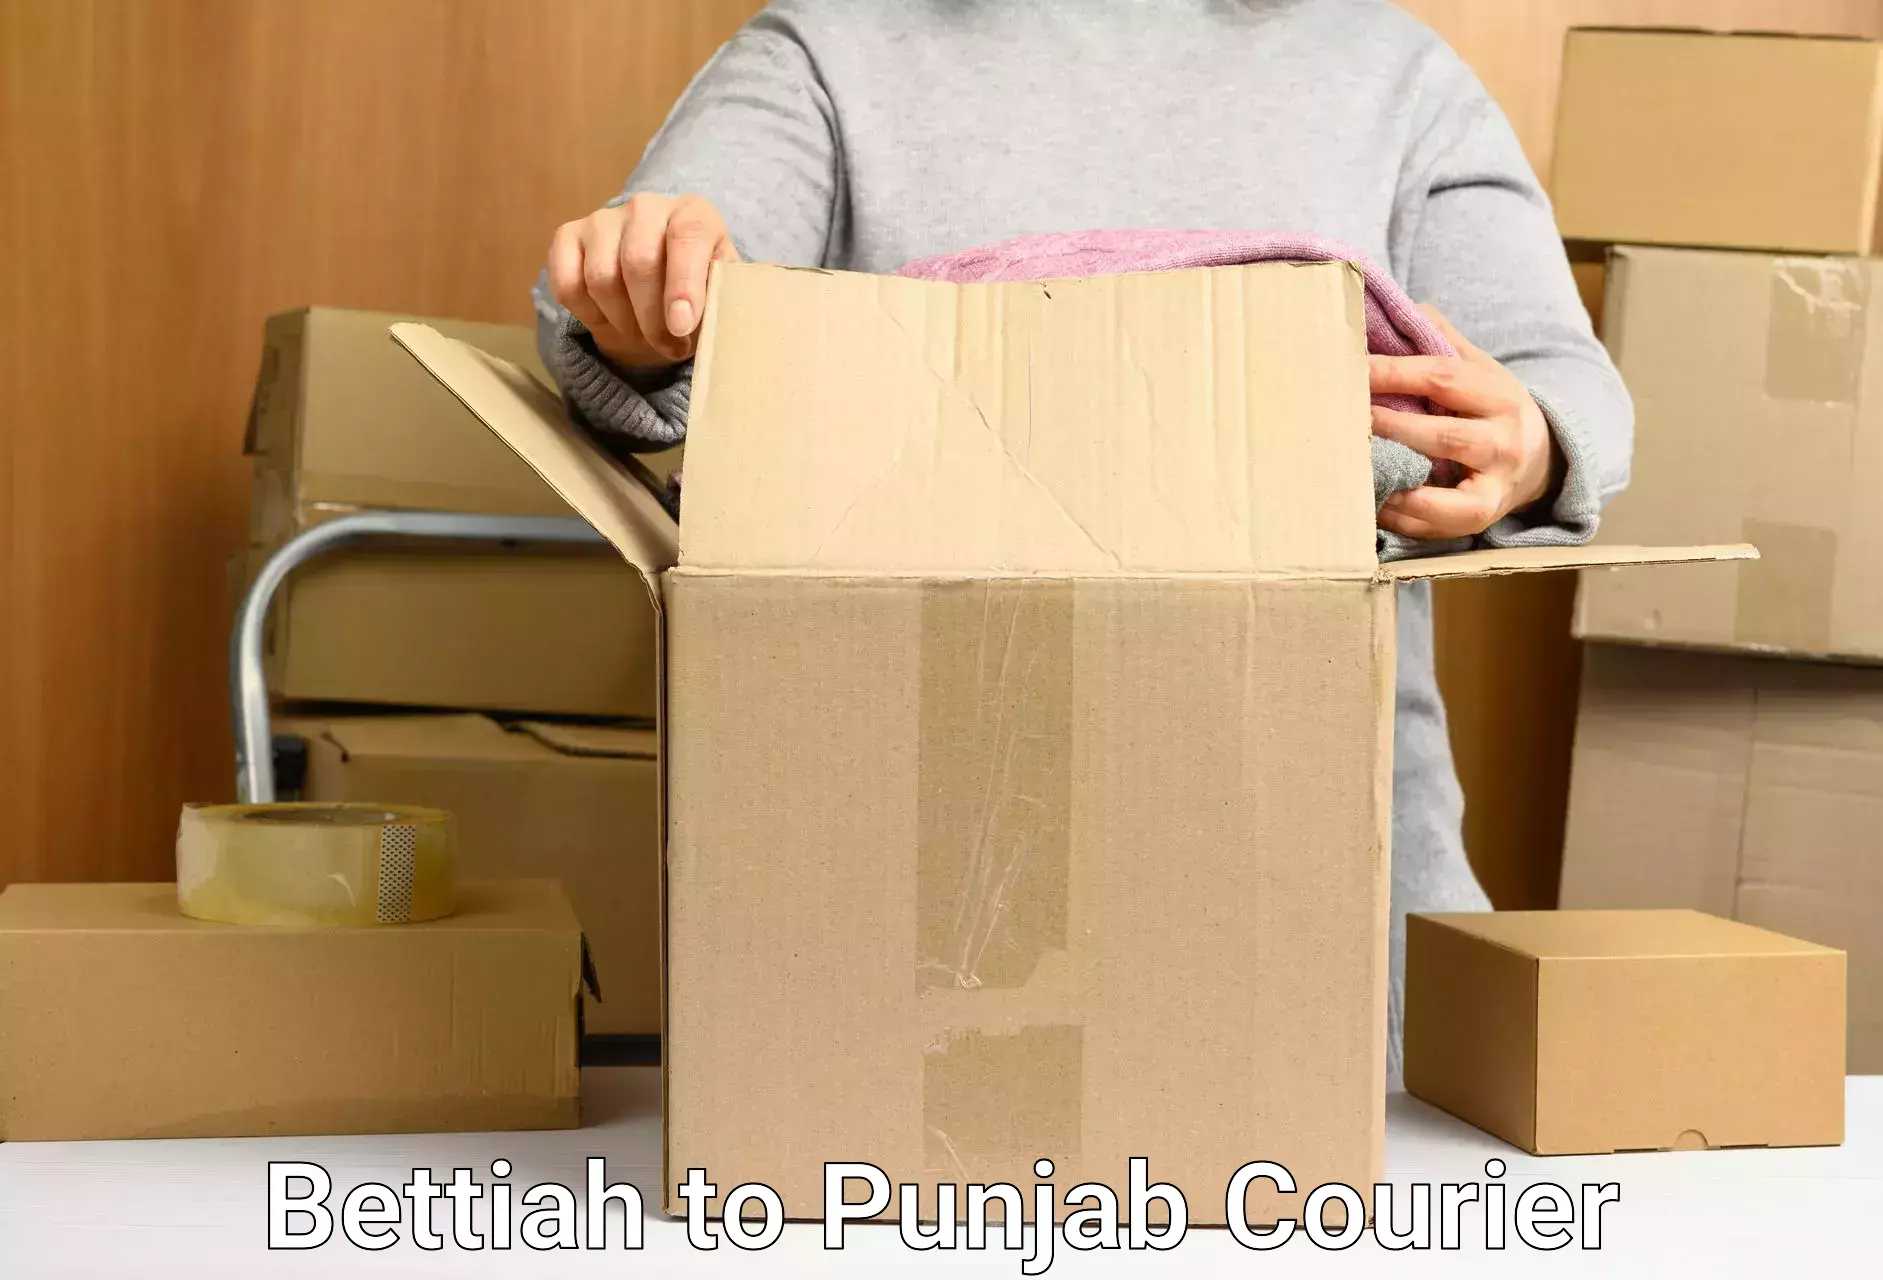 Global courier networks Bettiah to Punjab